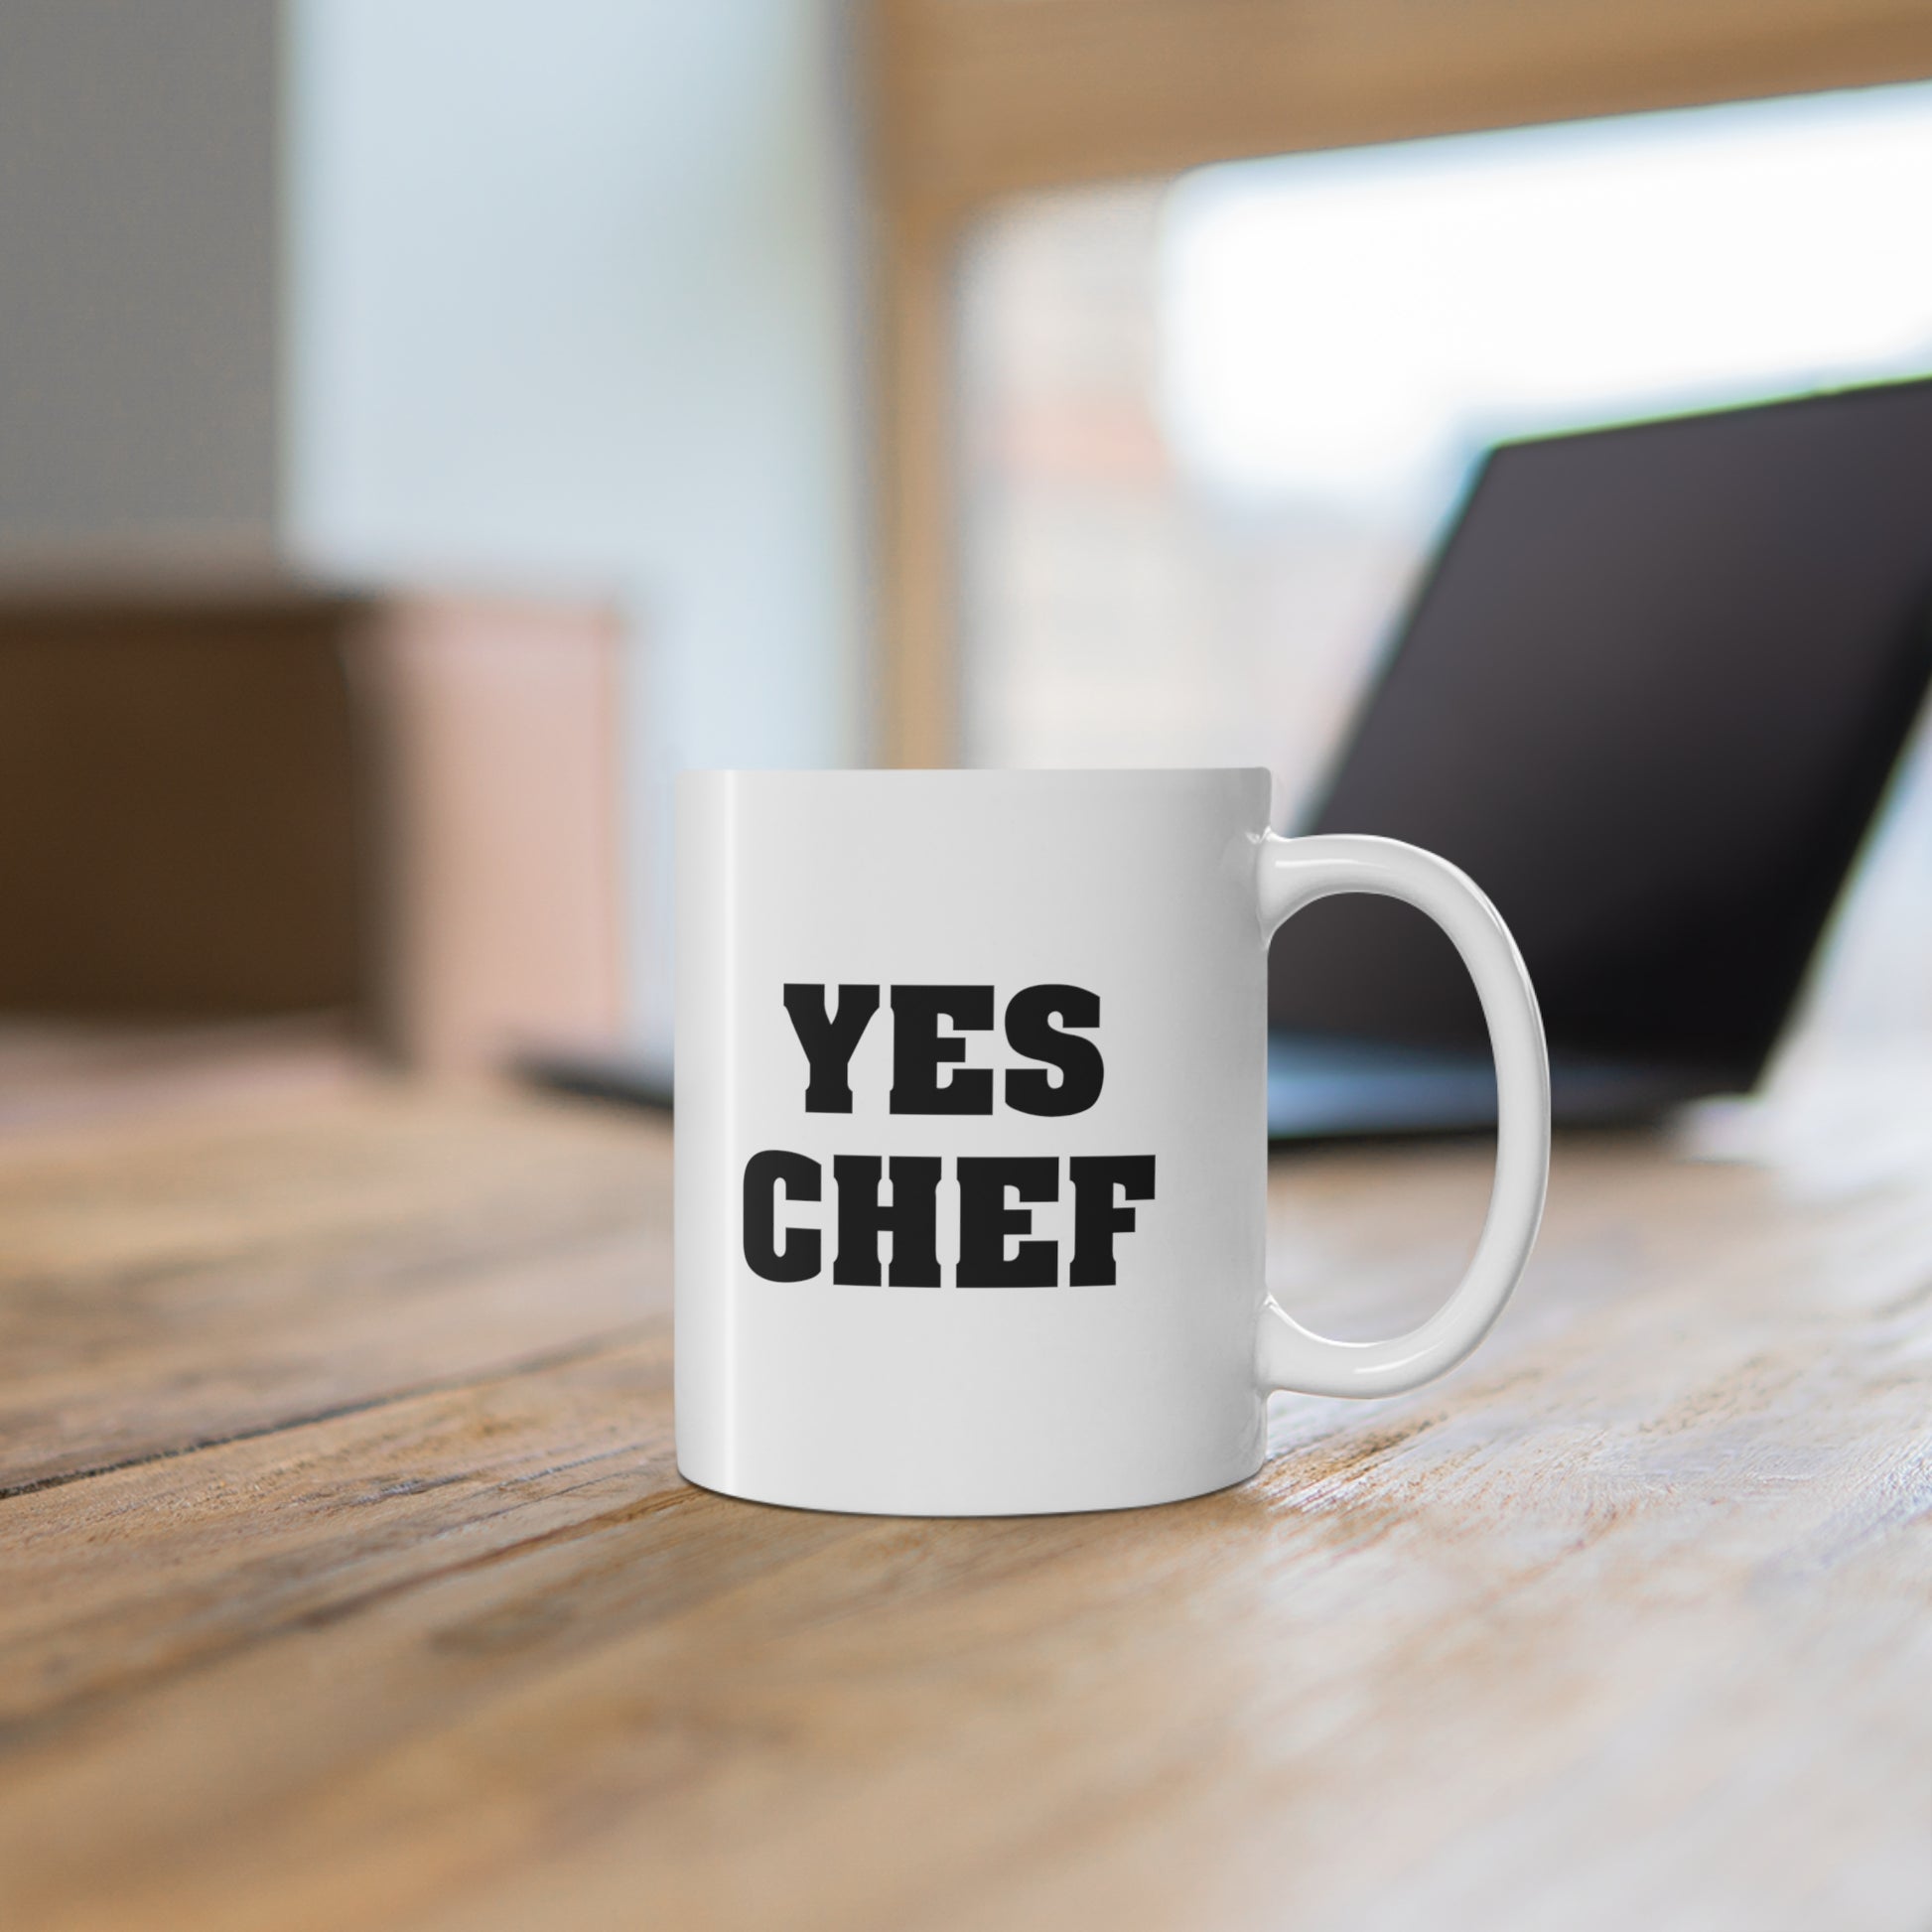 11oz ceramic mug with quote Yes Chef